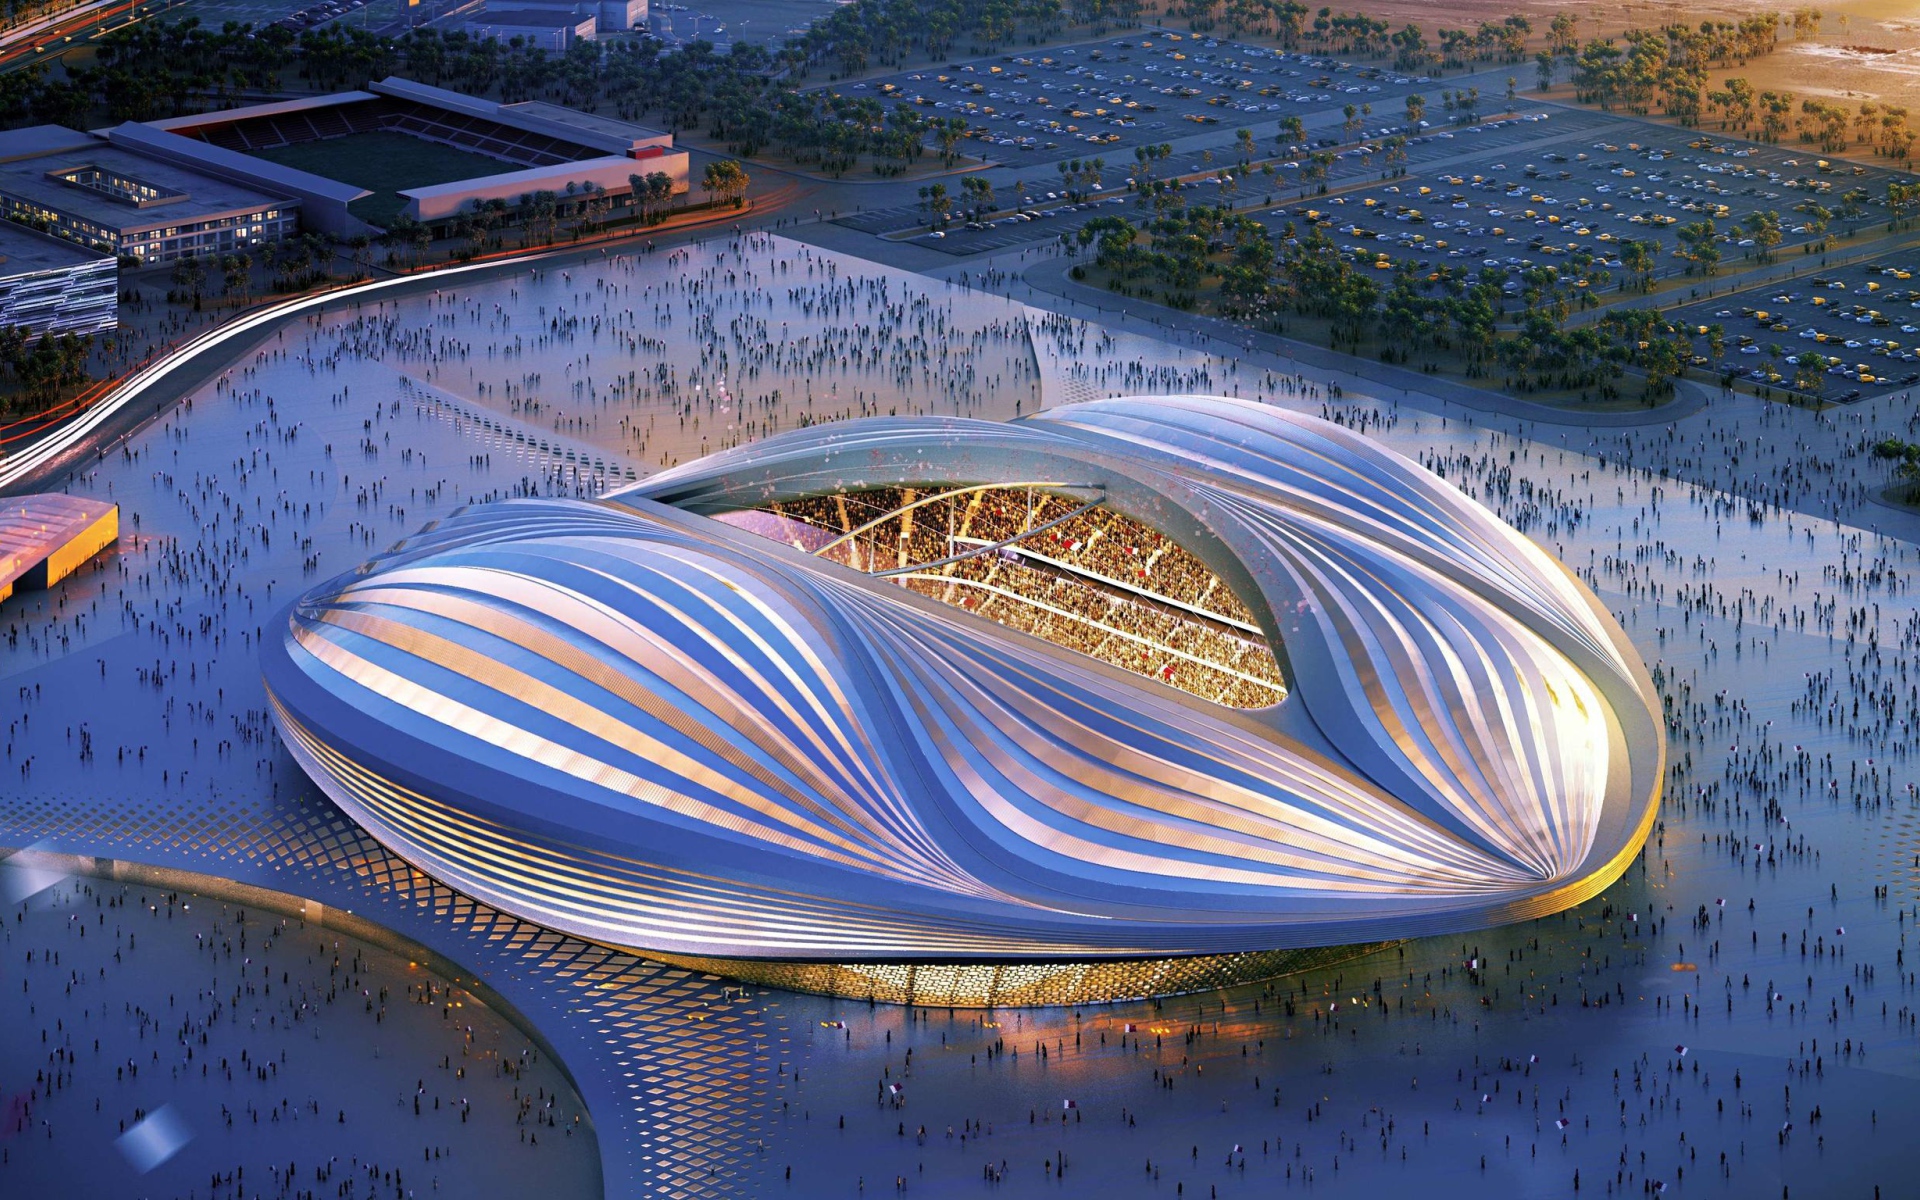 Stadium for the World Cup in Brazil 2014